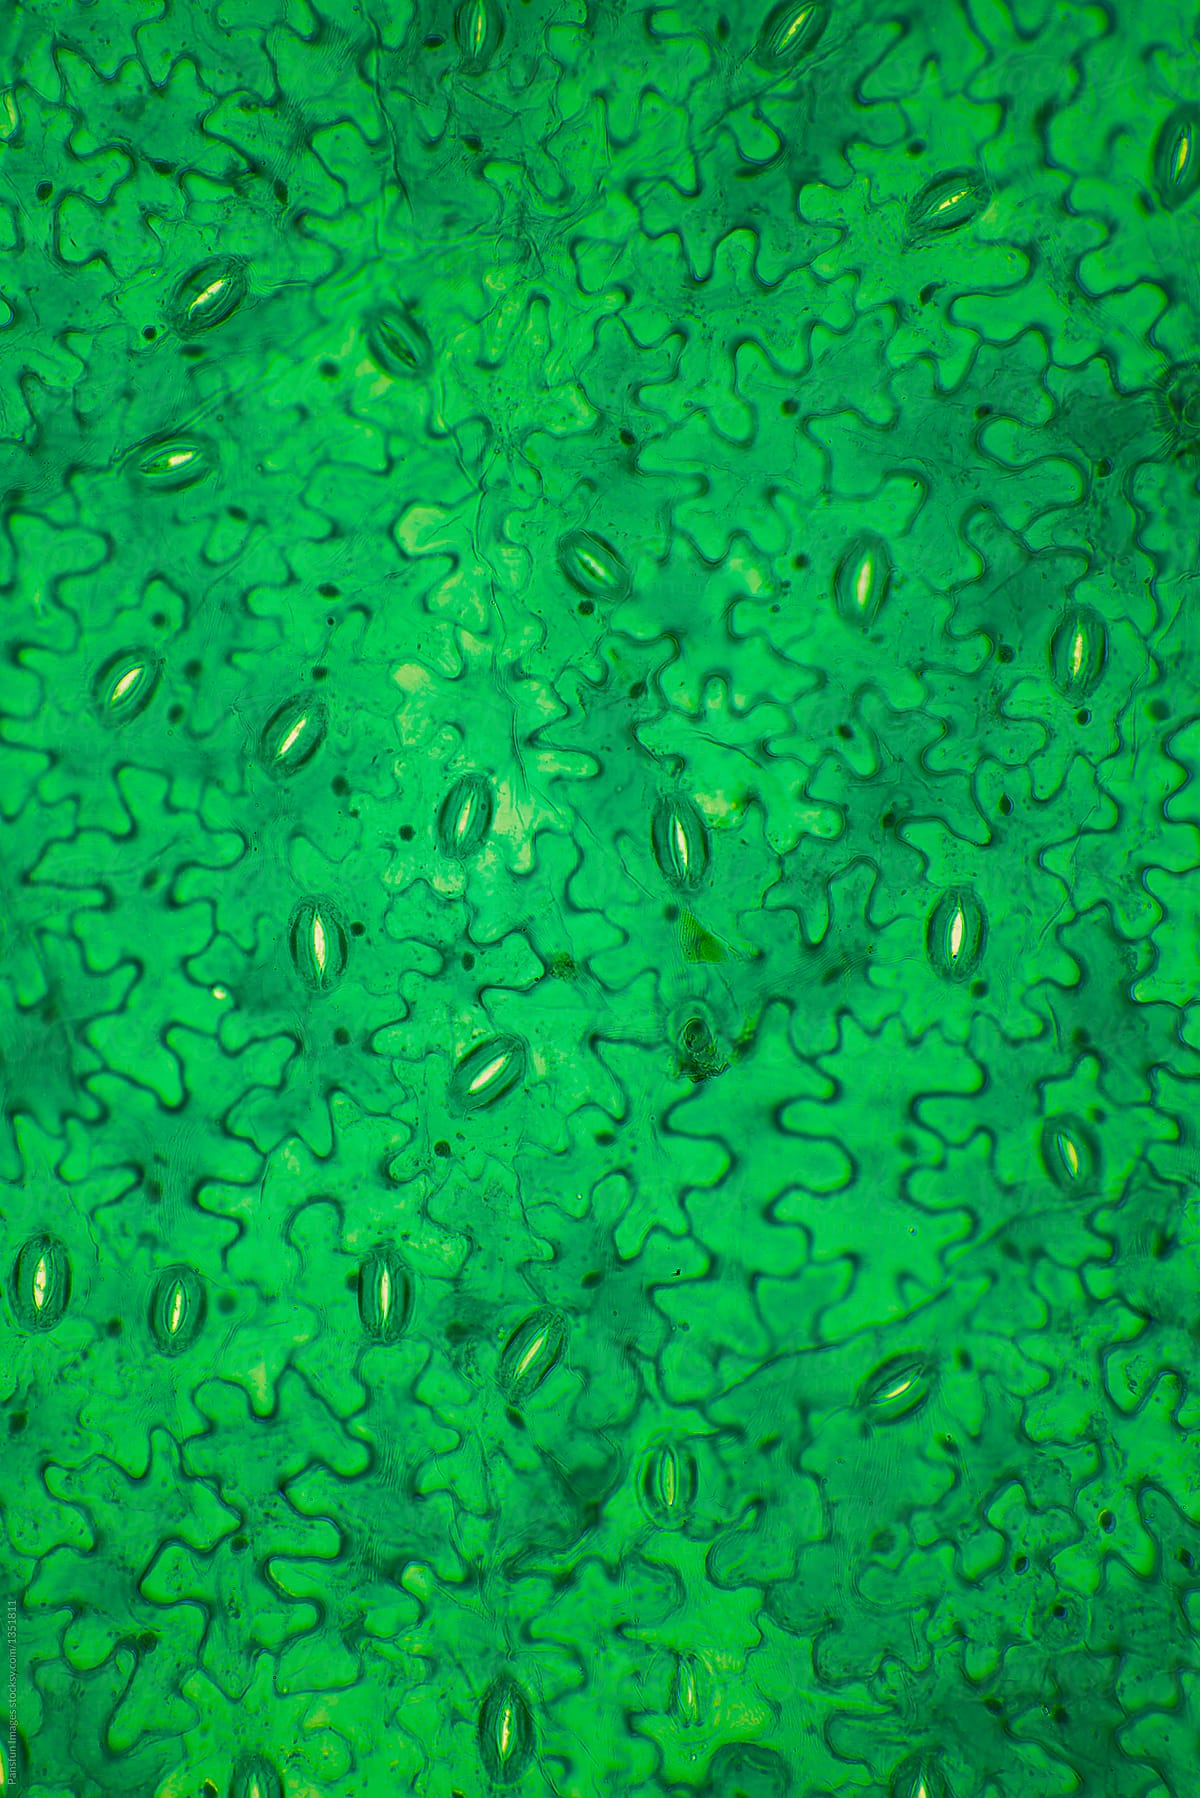 leaf-surface-stomata-from-rhoeo-disolor-plant-by-stocksy-contributor